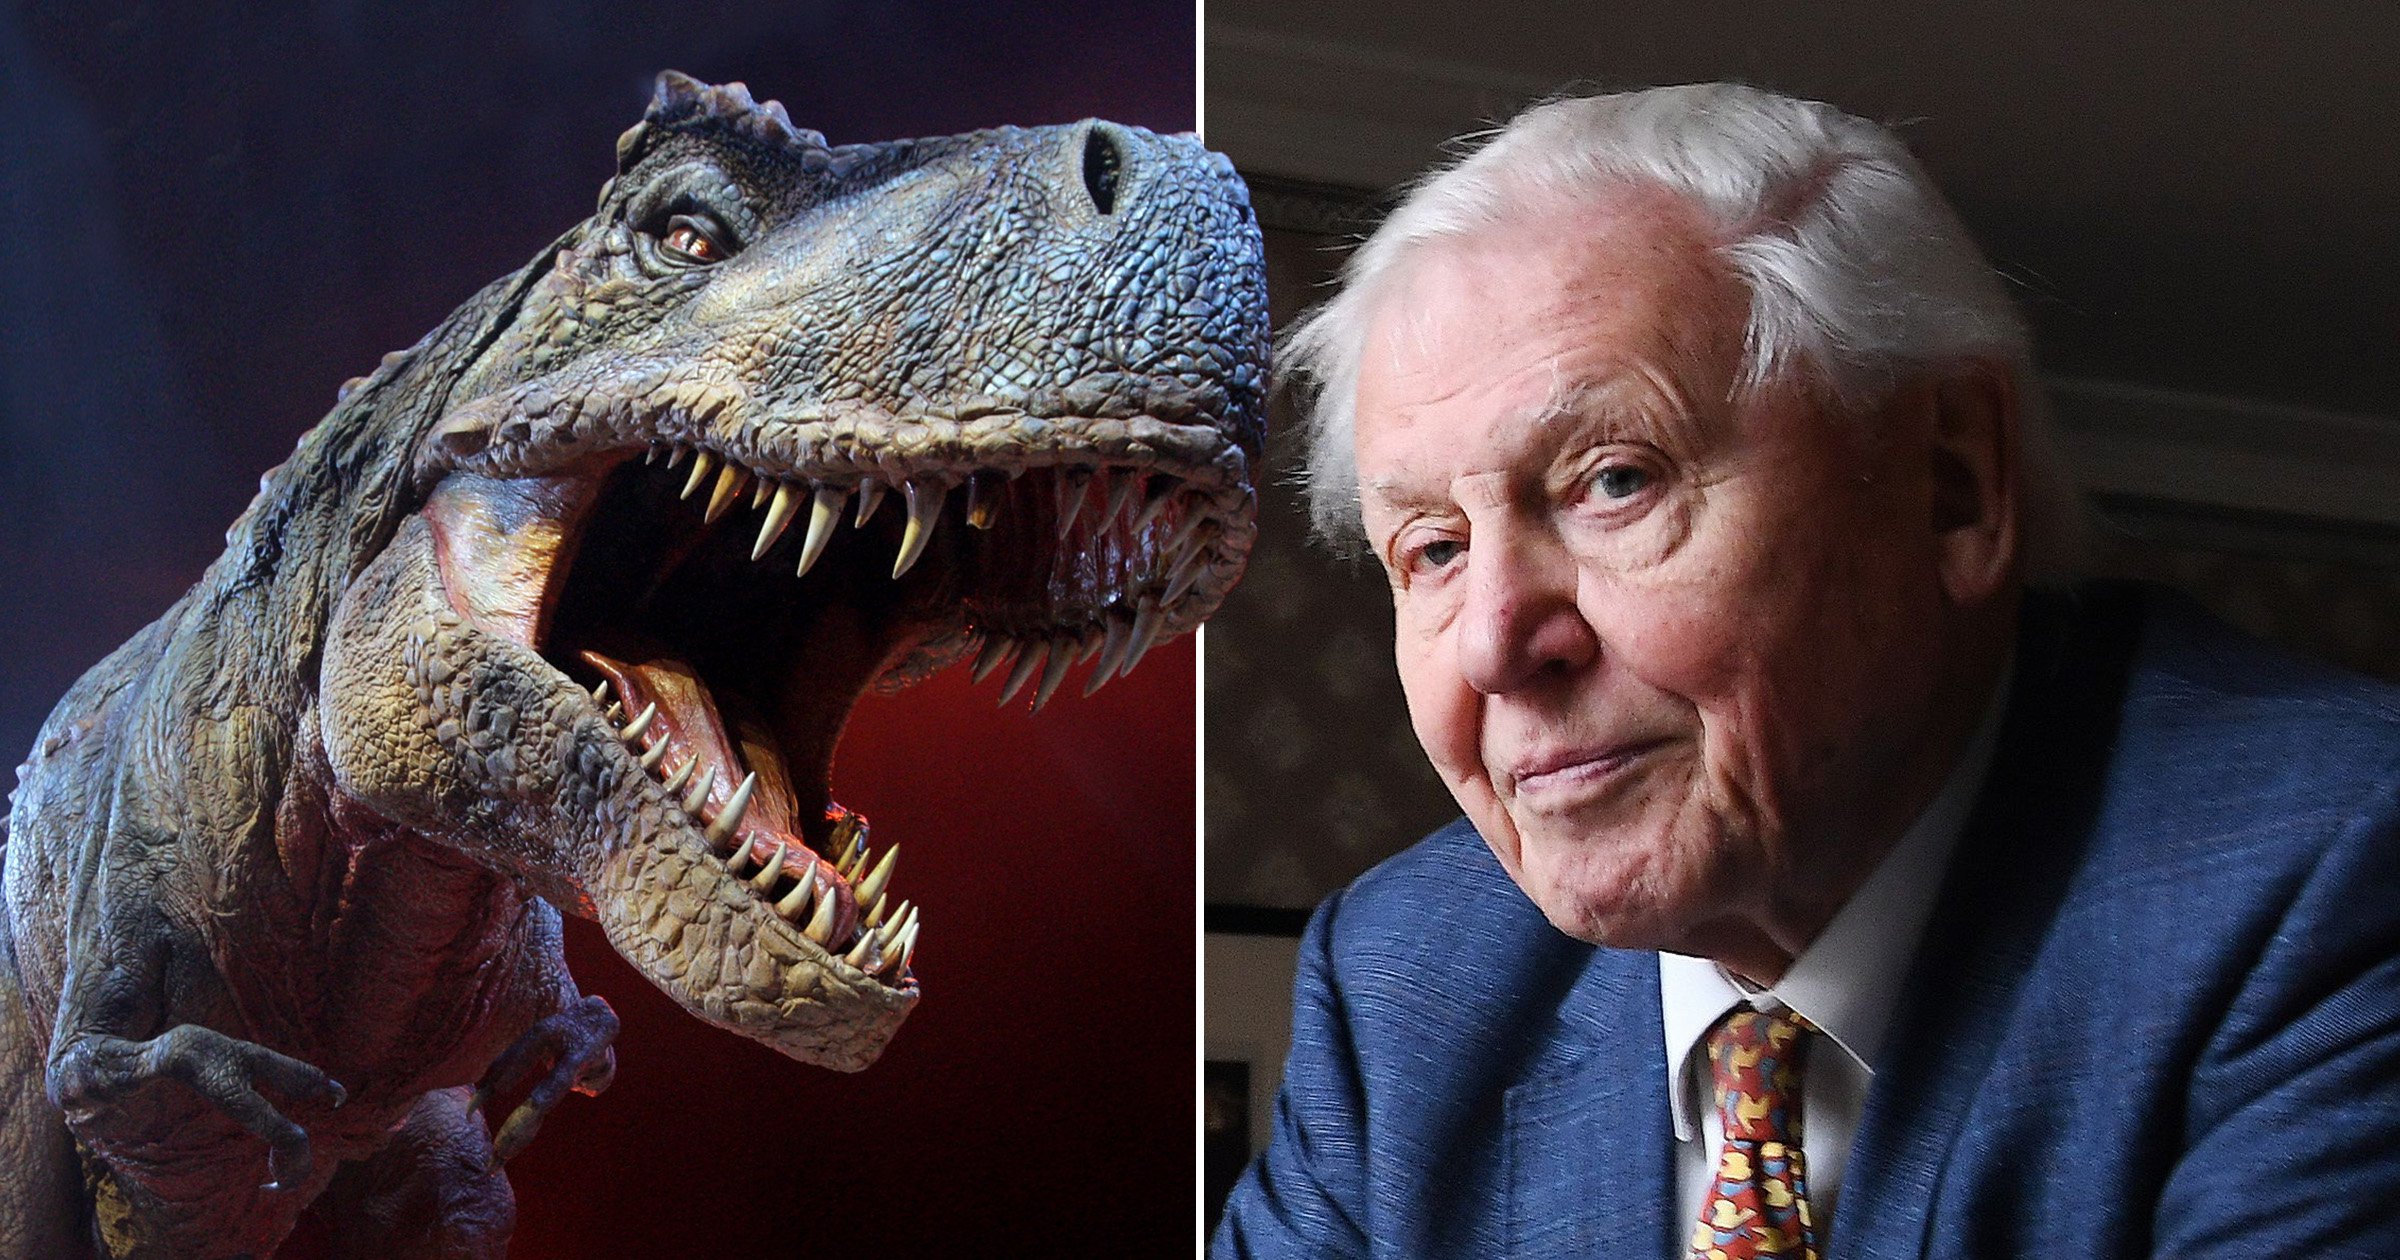 Sir David Attenborough to explore final day of dinosaurs in one-off BBC documentary